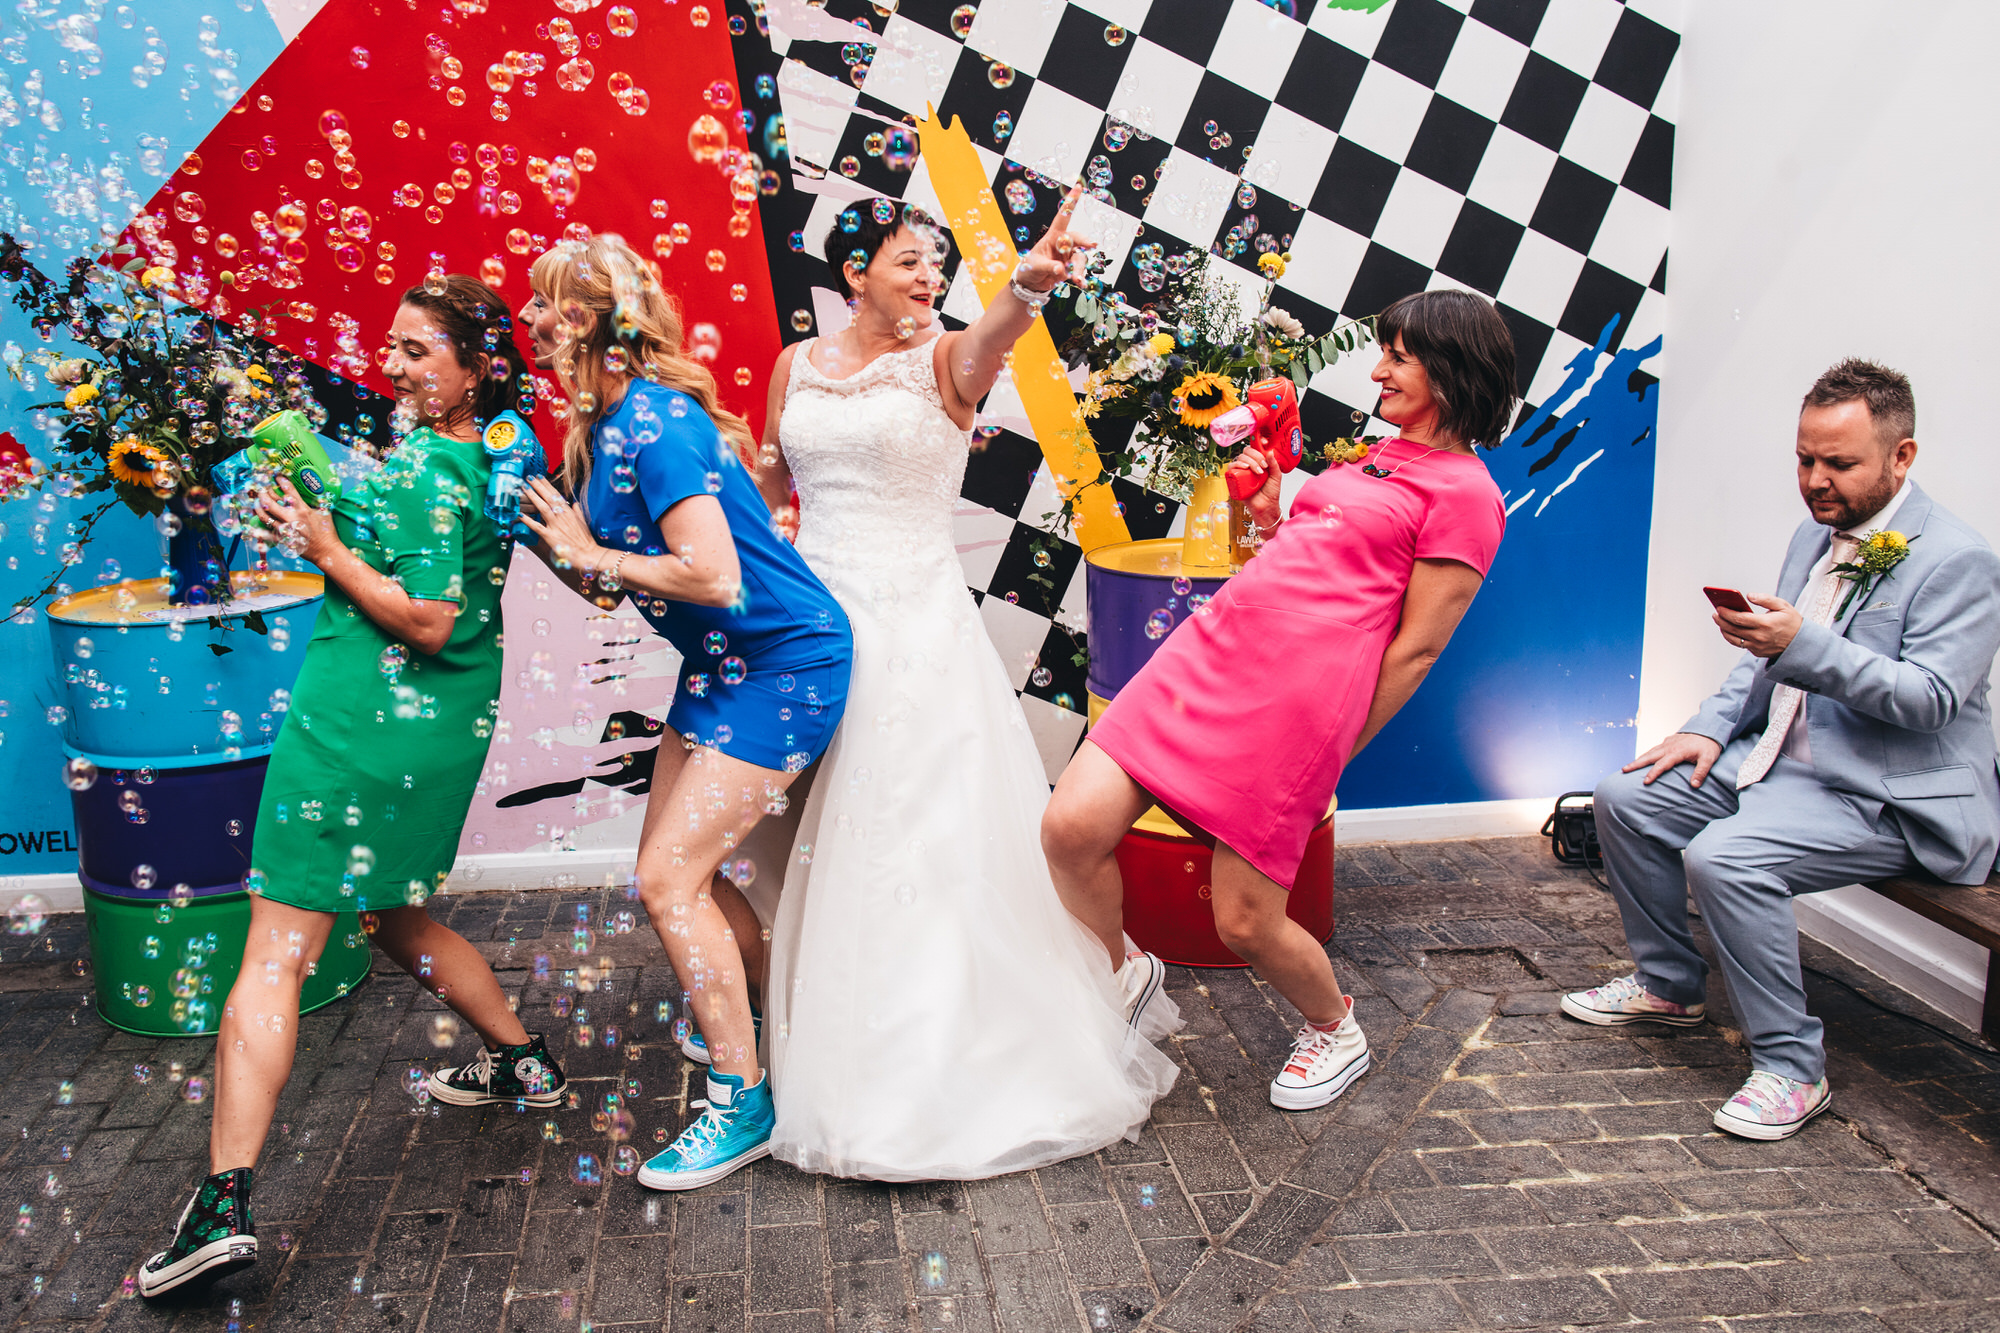 bride dancing in bubbles with bridesmaids, groom looking at phone